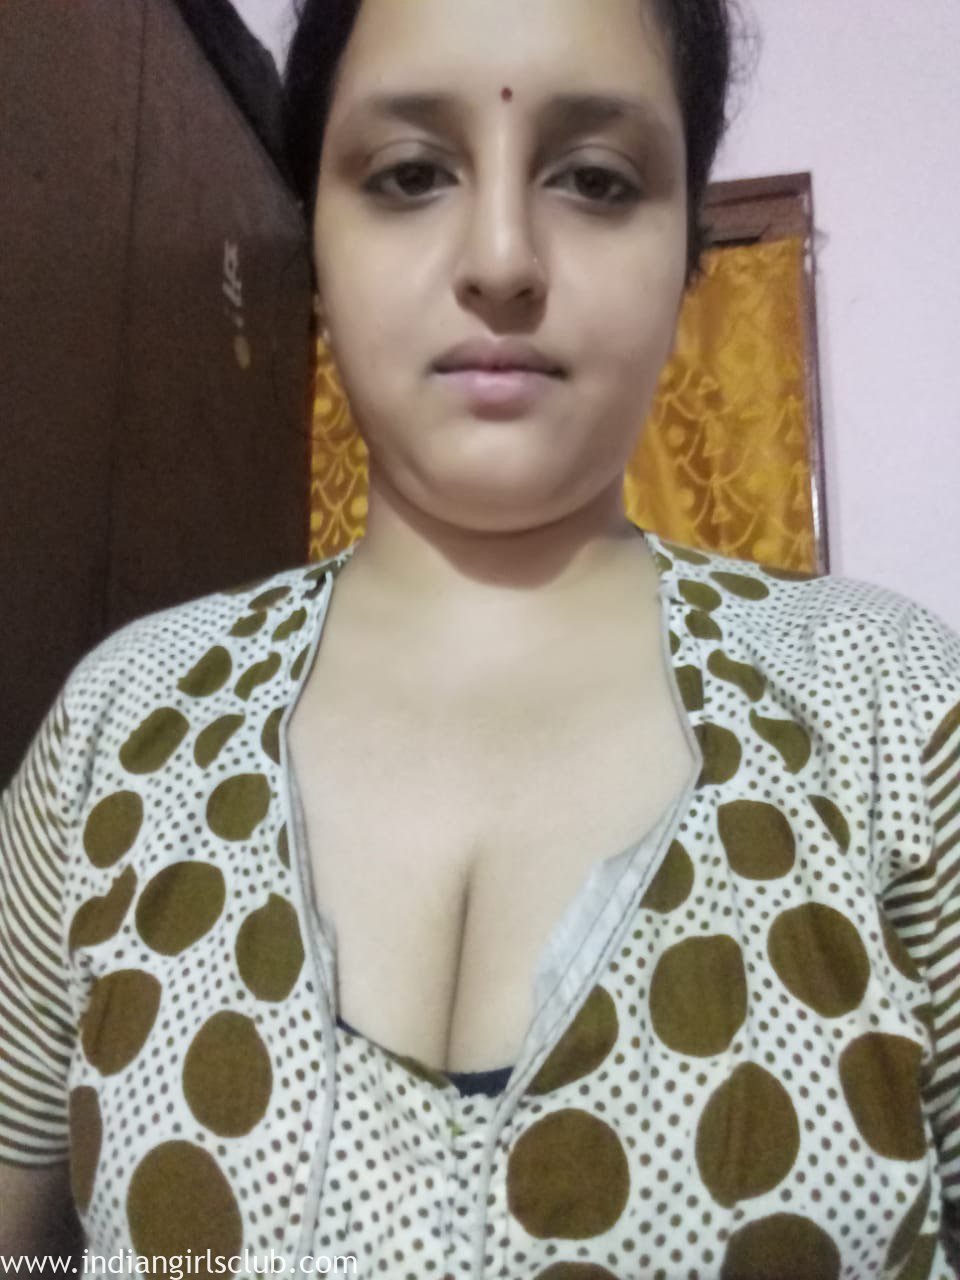 Horny Bengali Indian Housewife Ready For Hot image picture